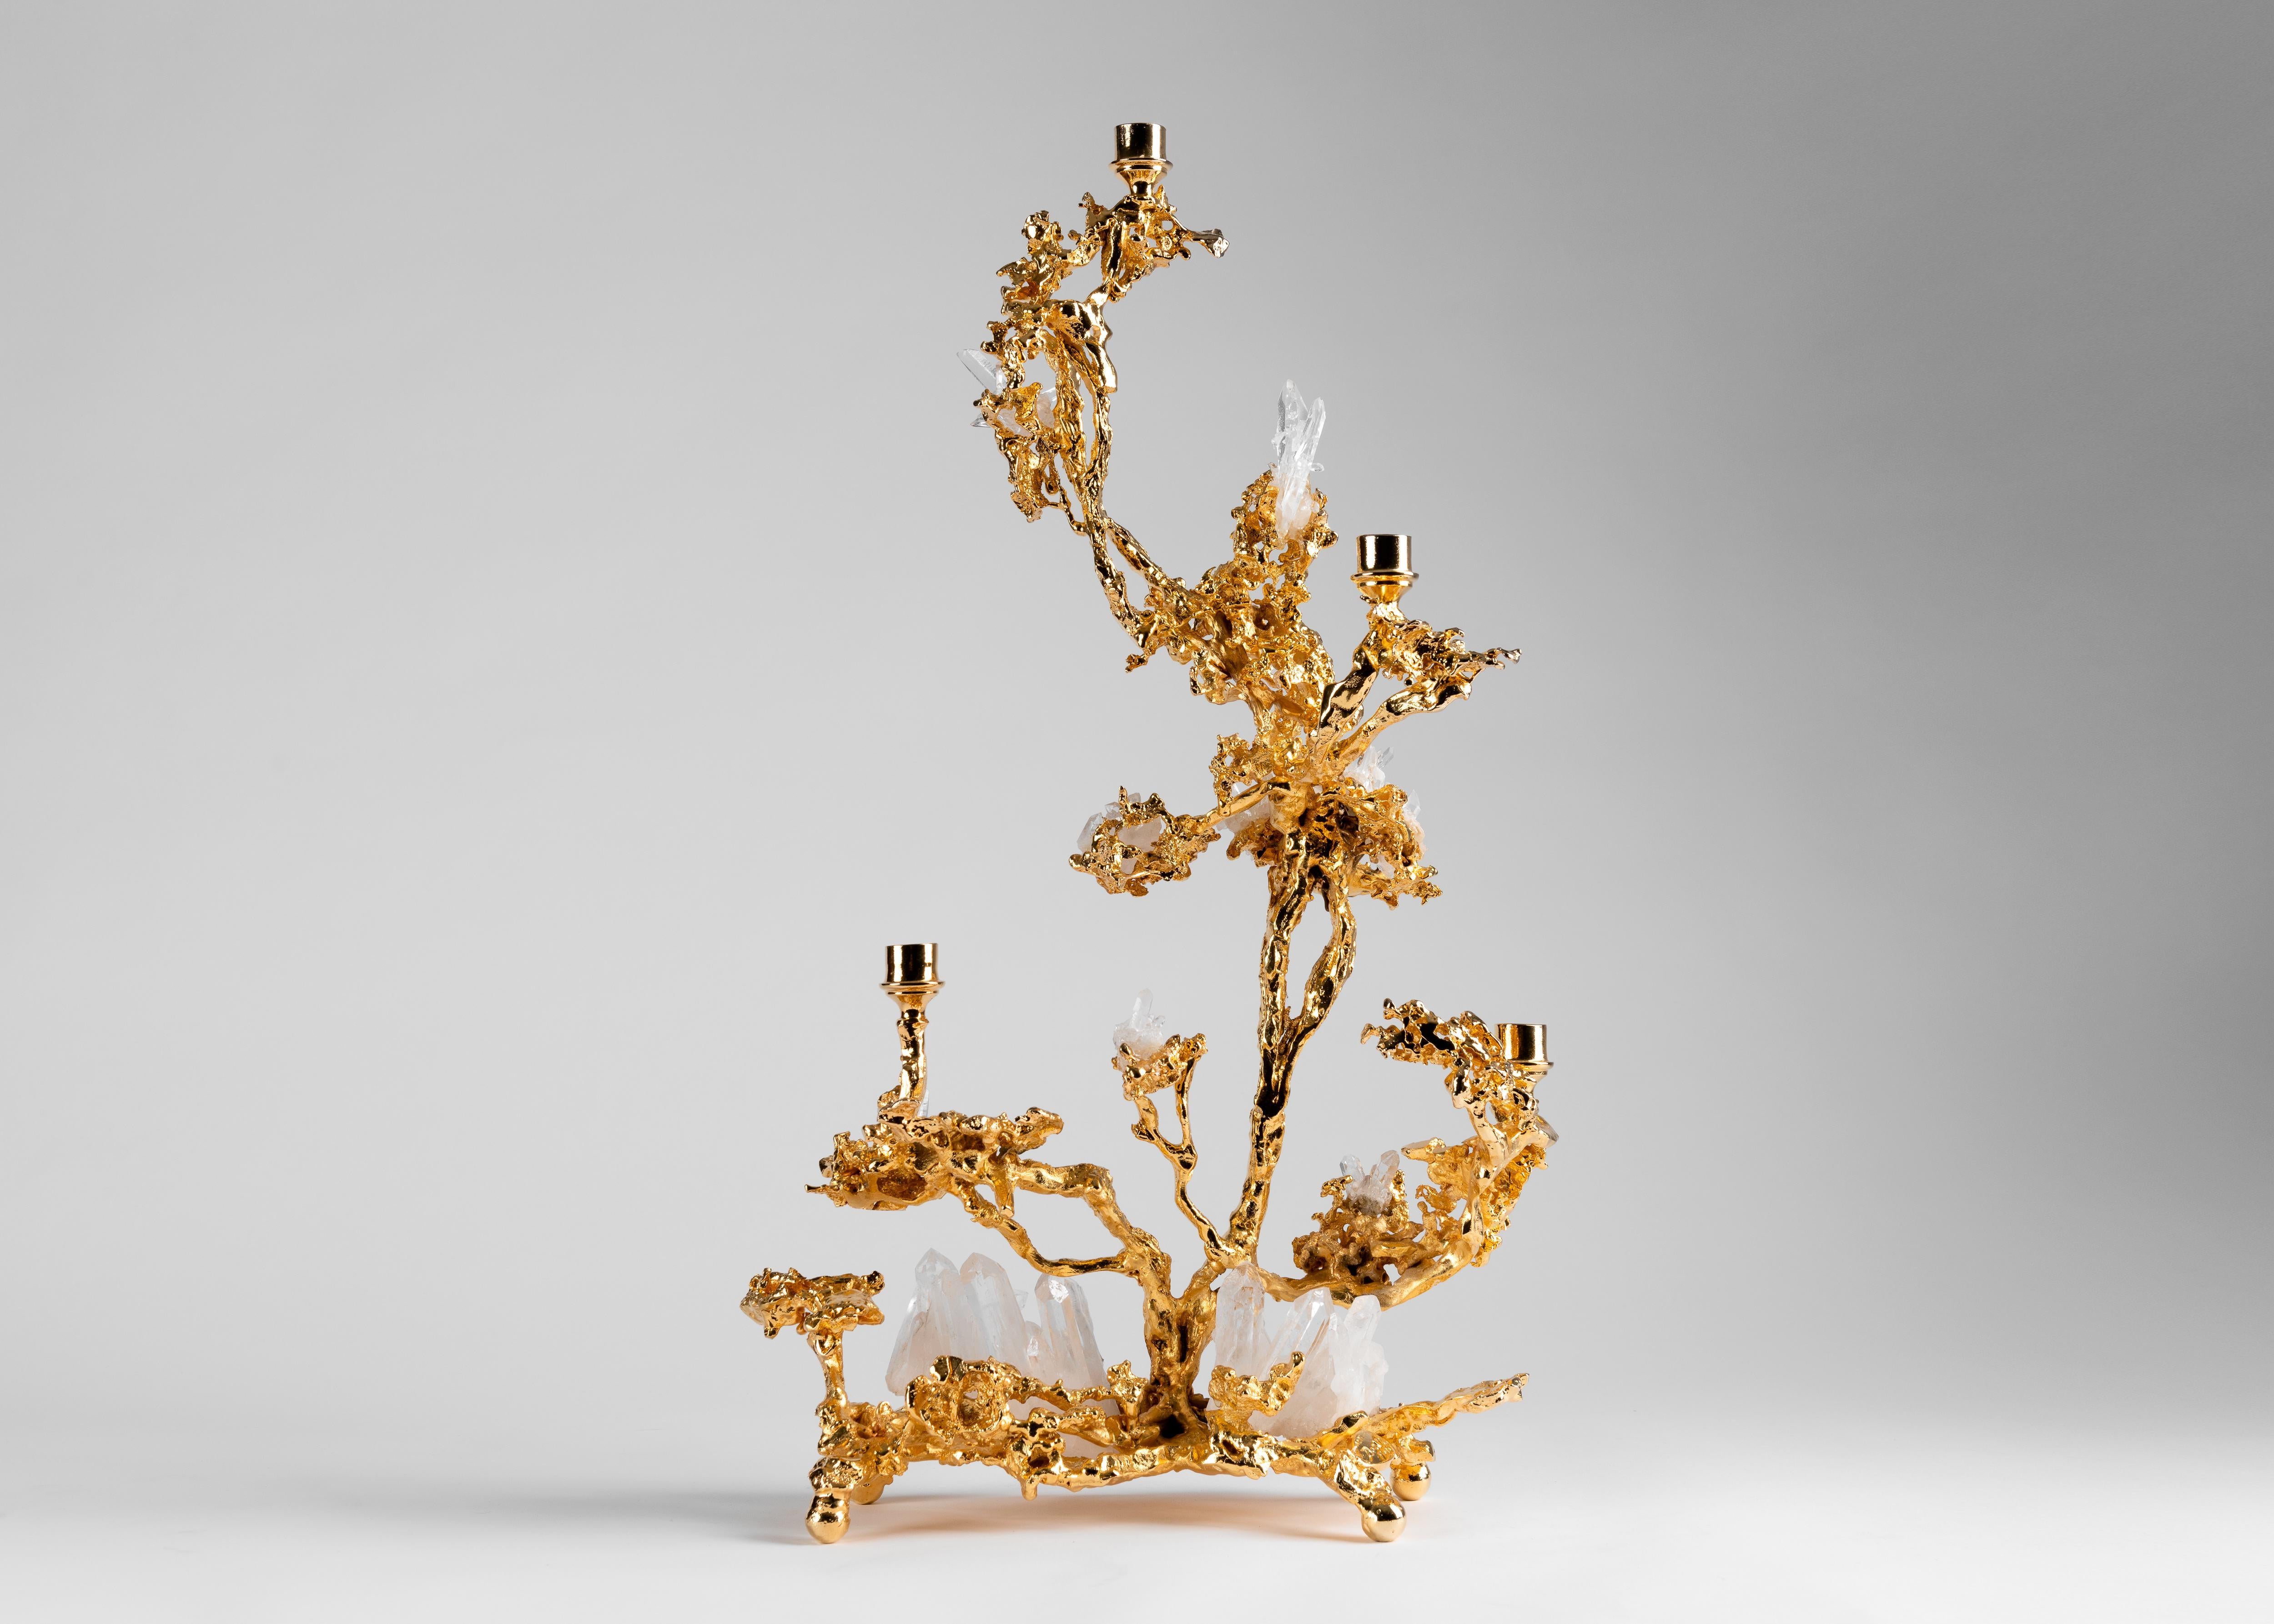 Claude Boeltz’s five branch candelabrum possesses the asymmetry of trickling water frozen in intense cold, a form further suggested by the quartz crystals set throughout. Yet, as with much of Boeltz's work, the piece is remarkable for the artist's